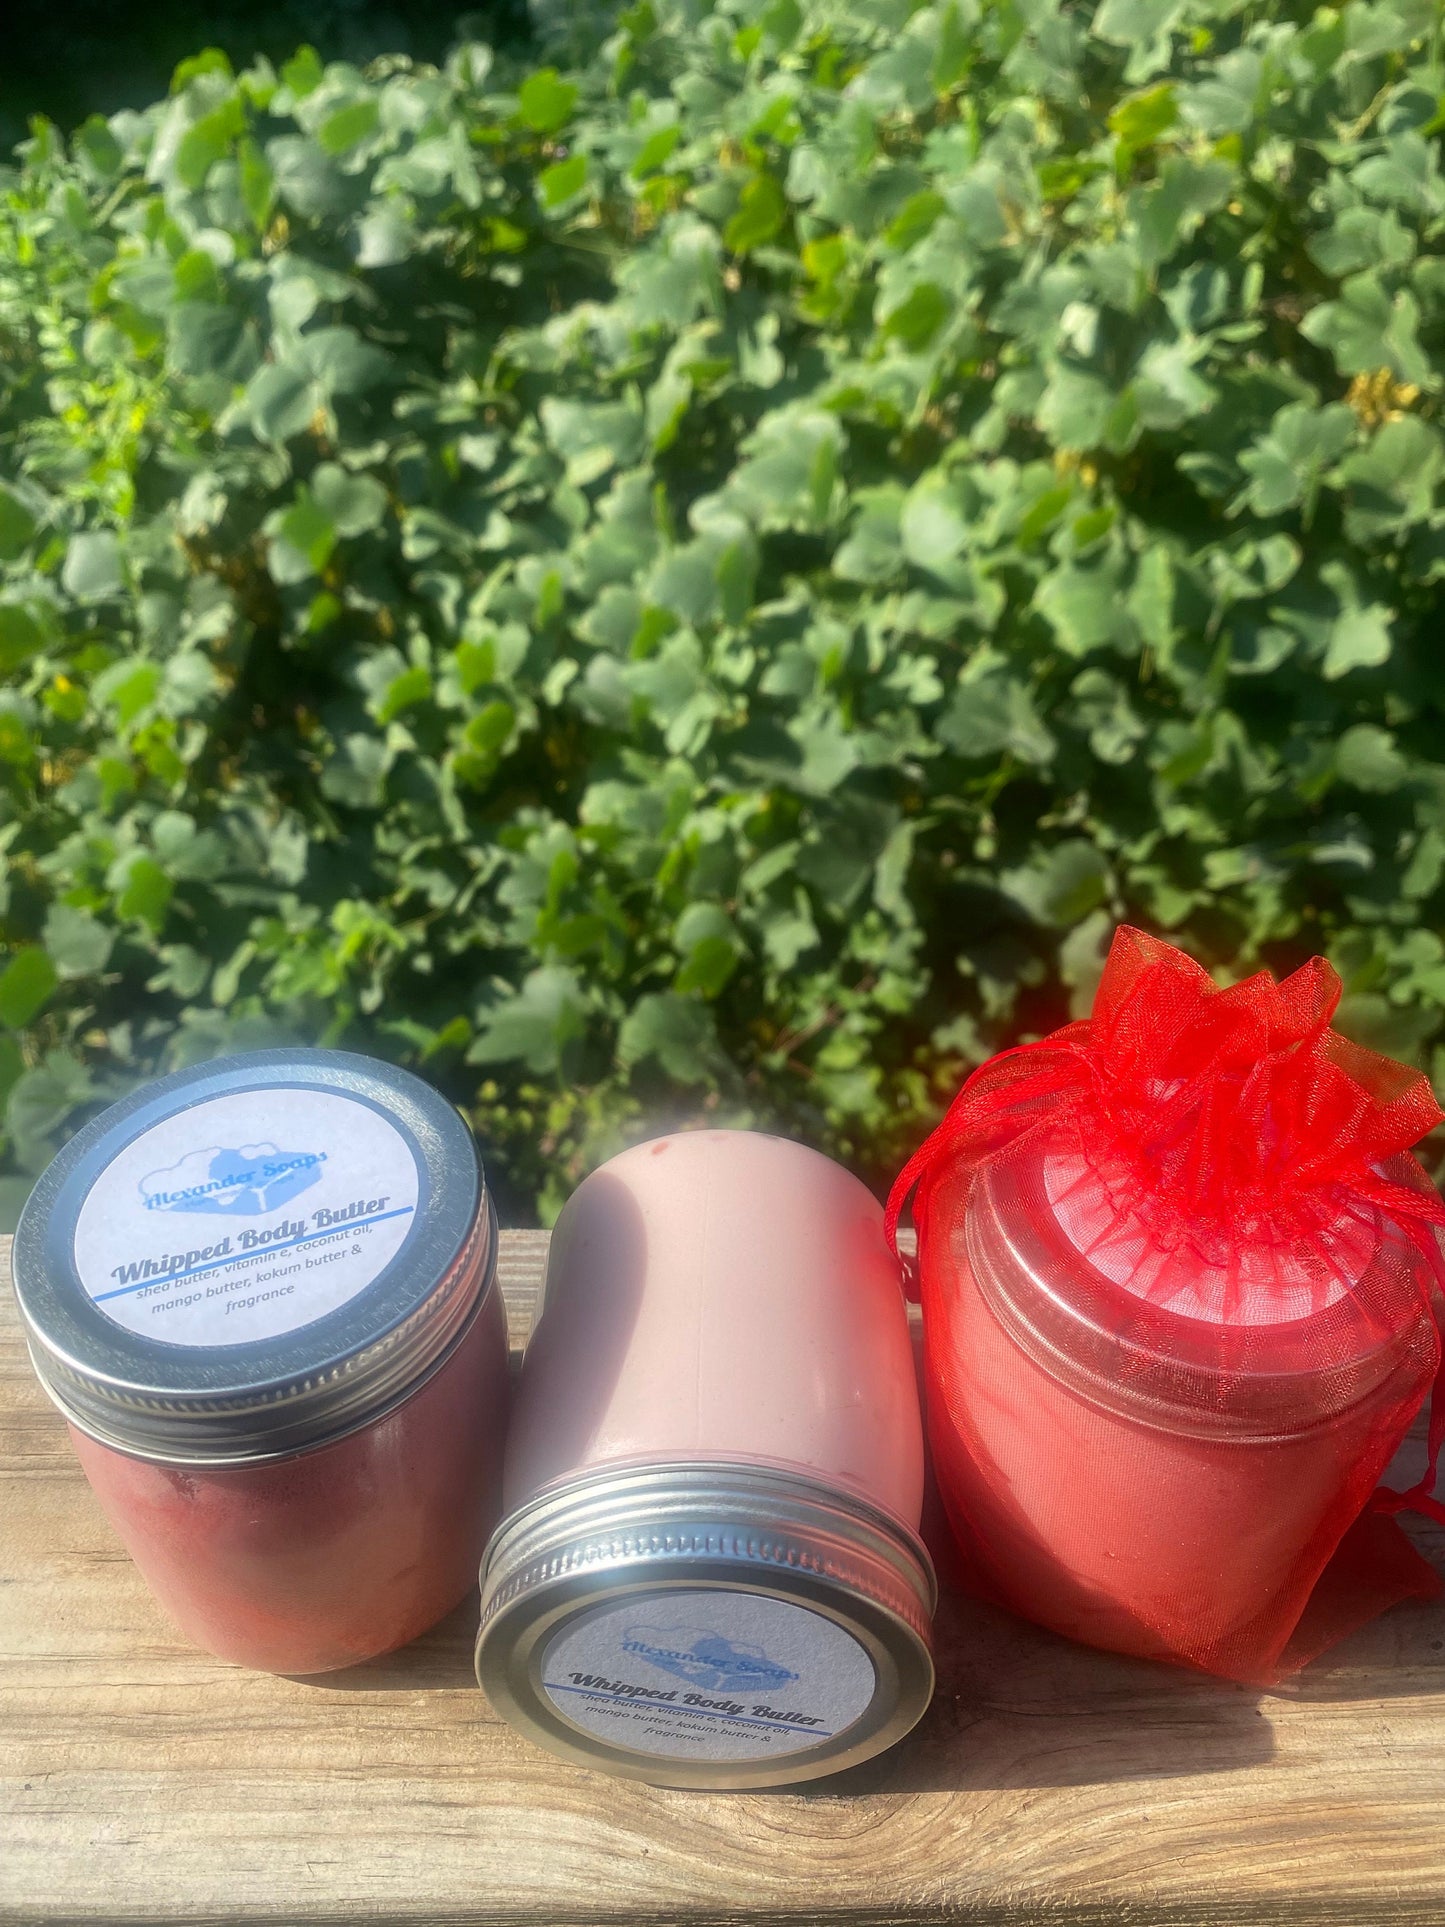 Custom Gifts for Her Luxurious Natural Vegan Whipped Body Butter Moisturizer for Sensitive Skin Eczema Relief Belly Butter